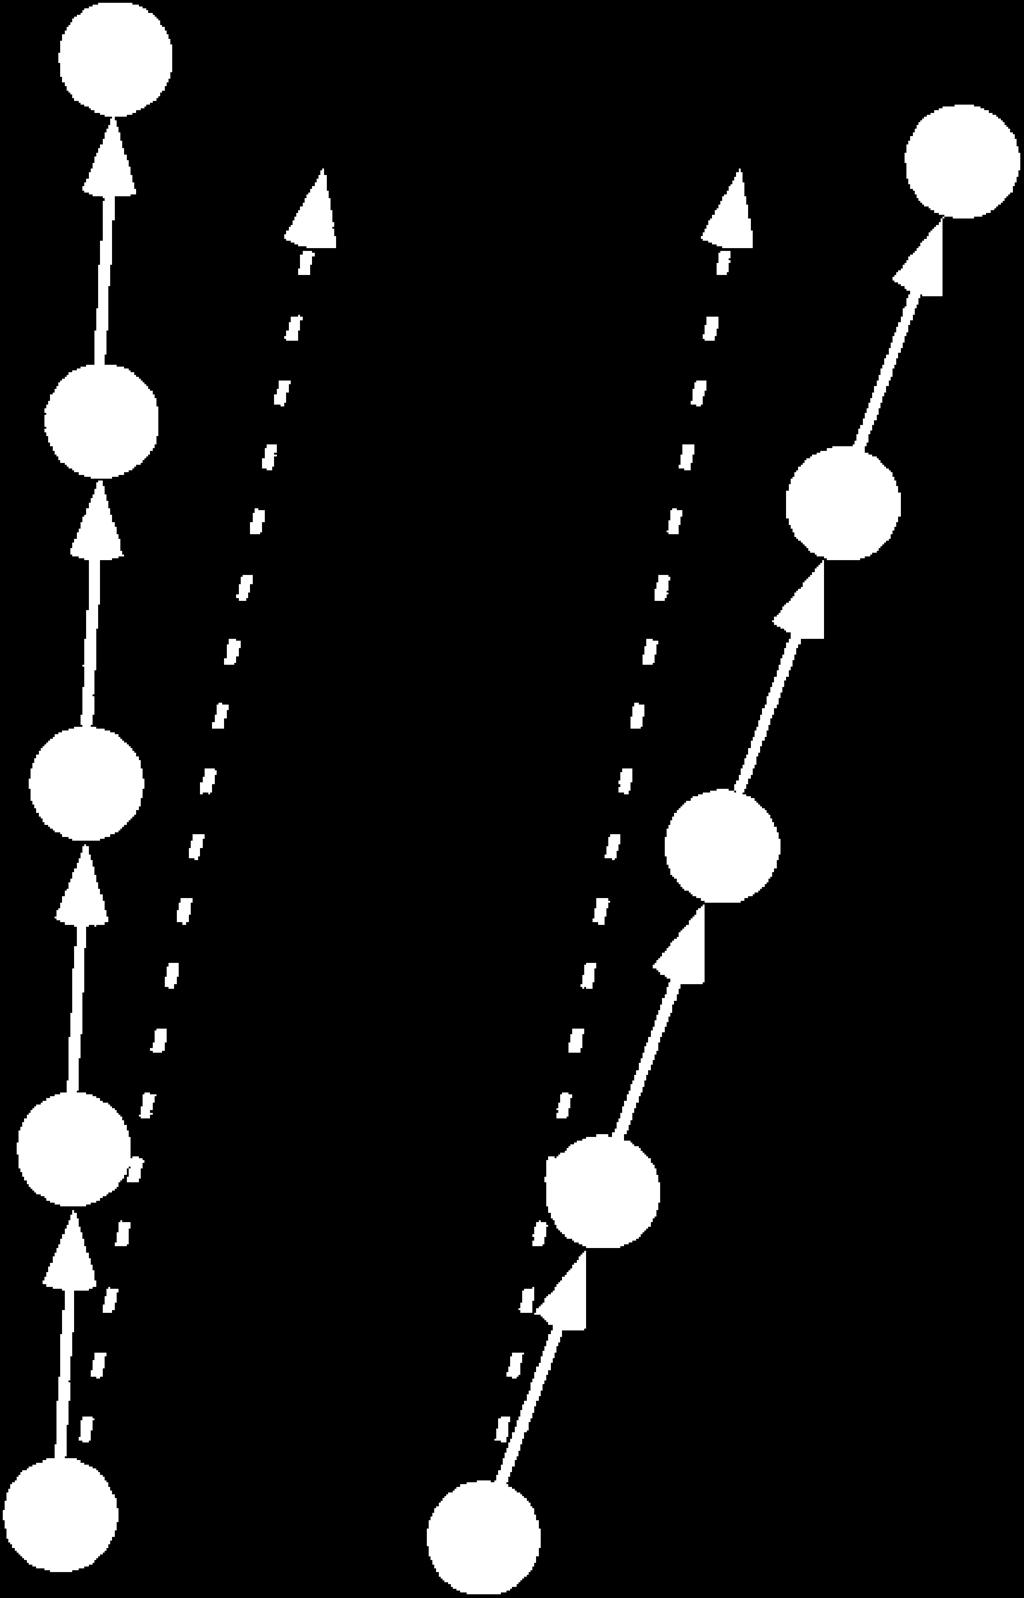 The direction of each dot is perturbed in each stimulus frame independent of its direction in the previous frame. (b) Experimental condition 2: Fixed-Random-Trajectory Direction Noise.